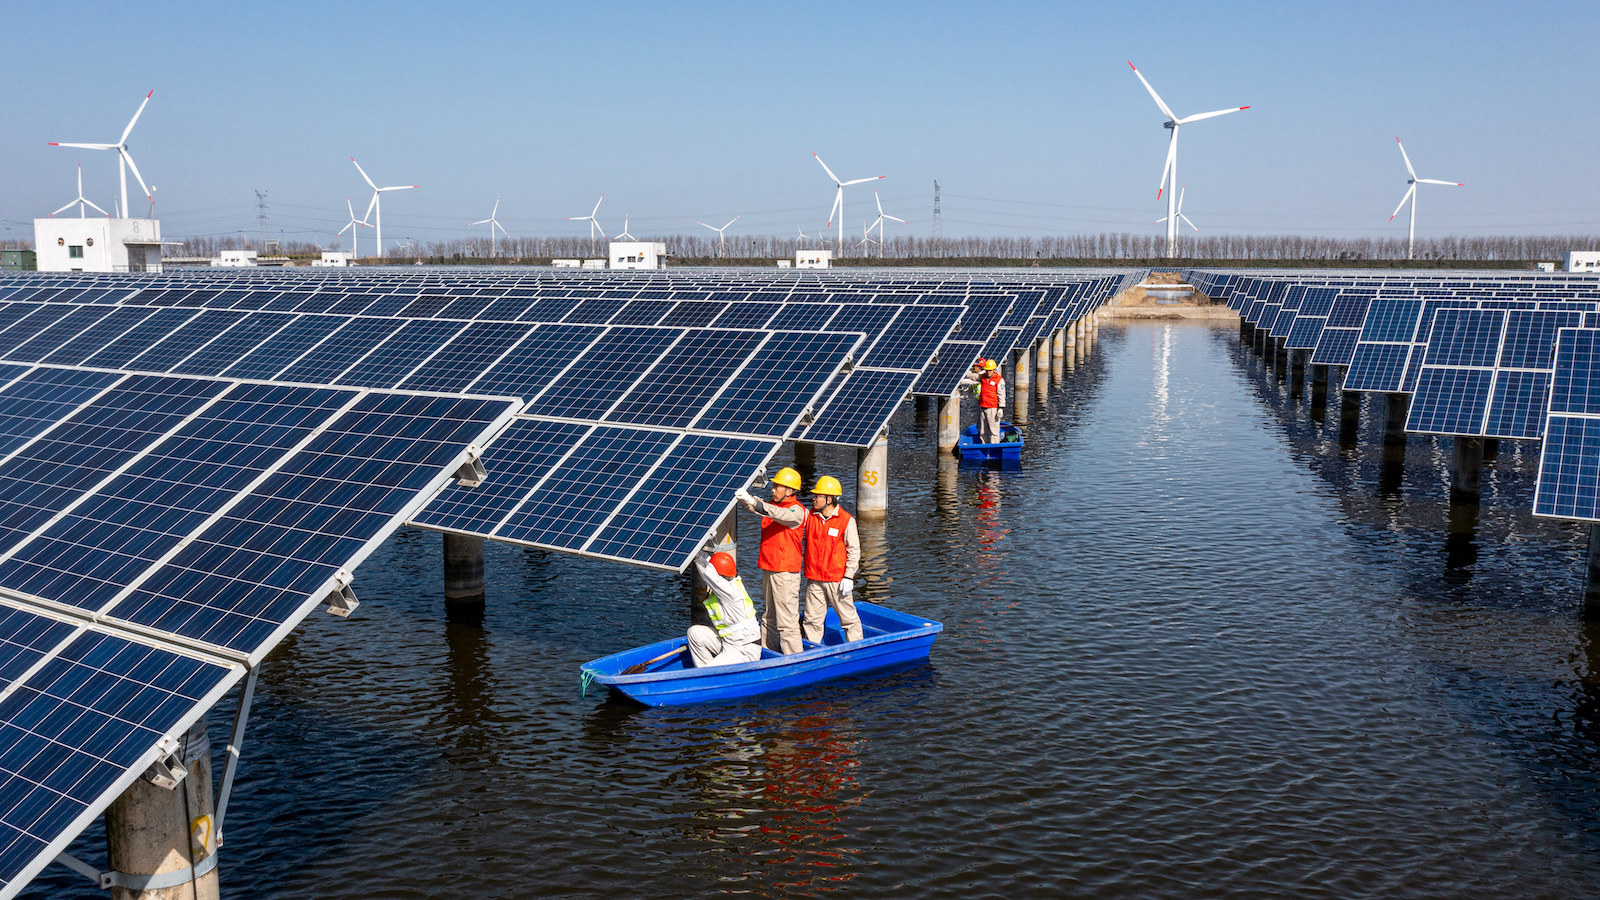 A crew on a boat inspects solar panels with wind turbines in the background